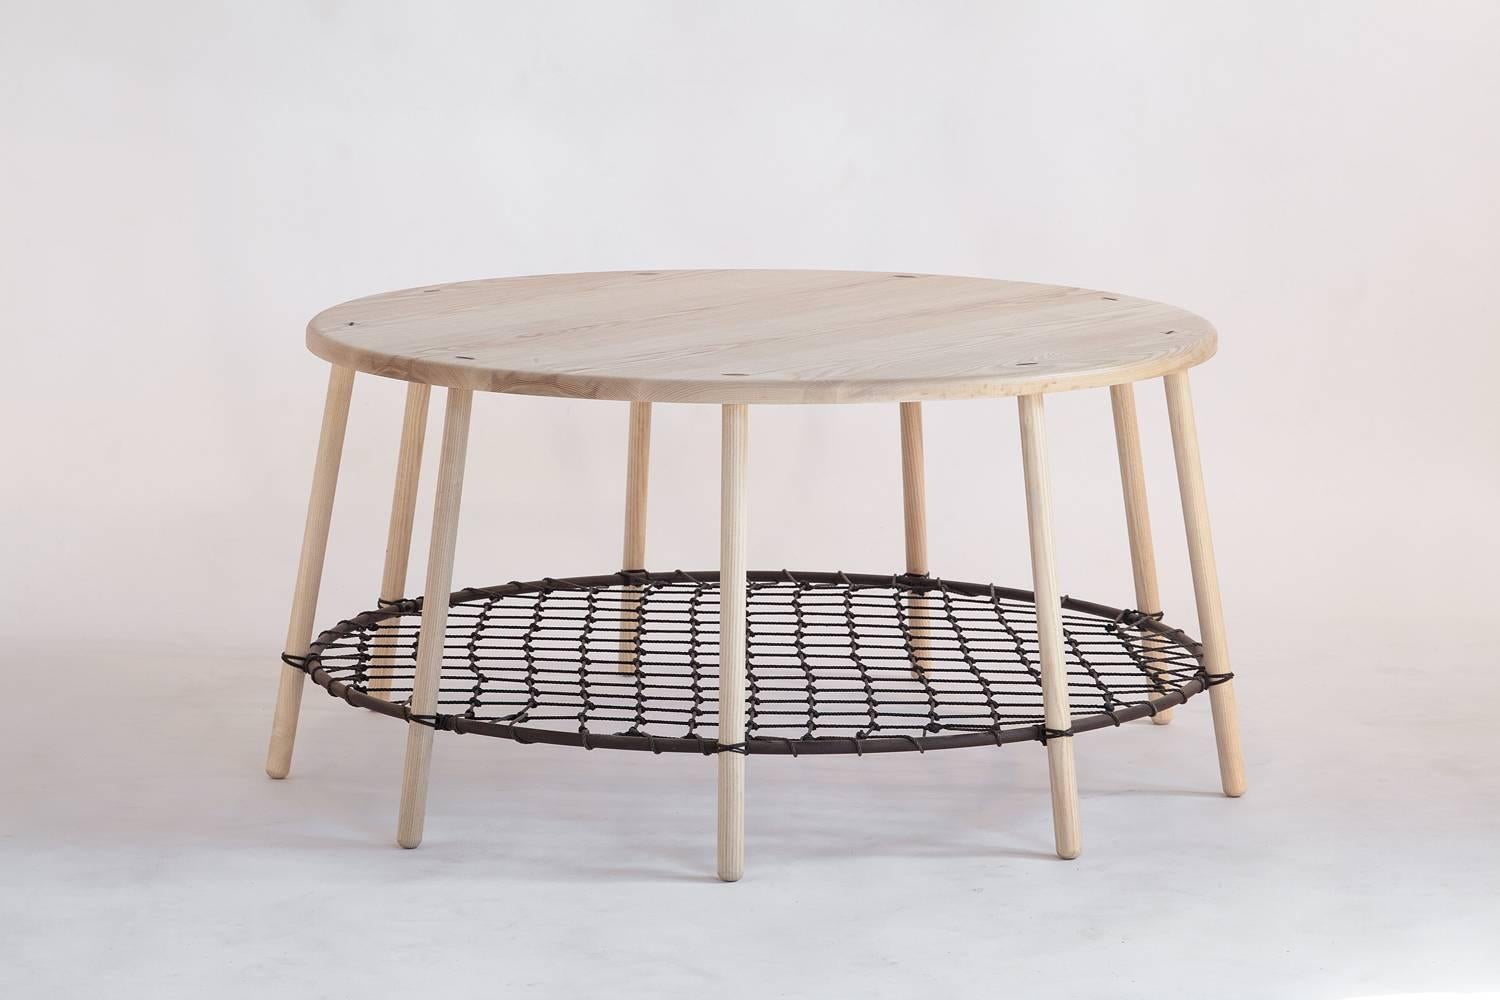 Hand Carved White Ash Stool with Copper Plated Ring Support

A place where the forest meets the sea, the 'Findhorn' collection of tables and stools contain details from both. Through-tenons exposed on the tables top are glued and set with metal